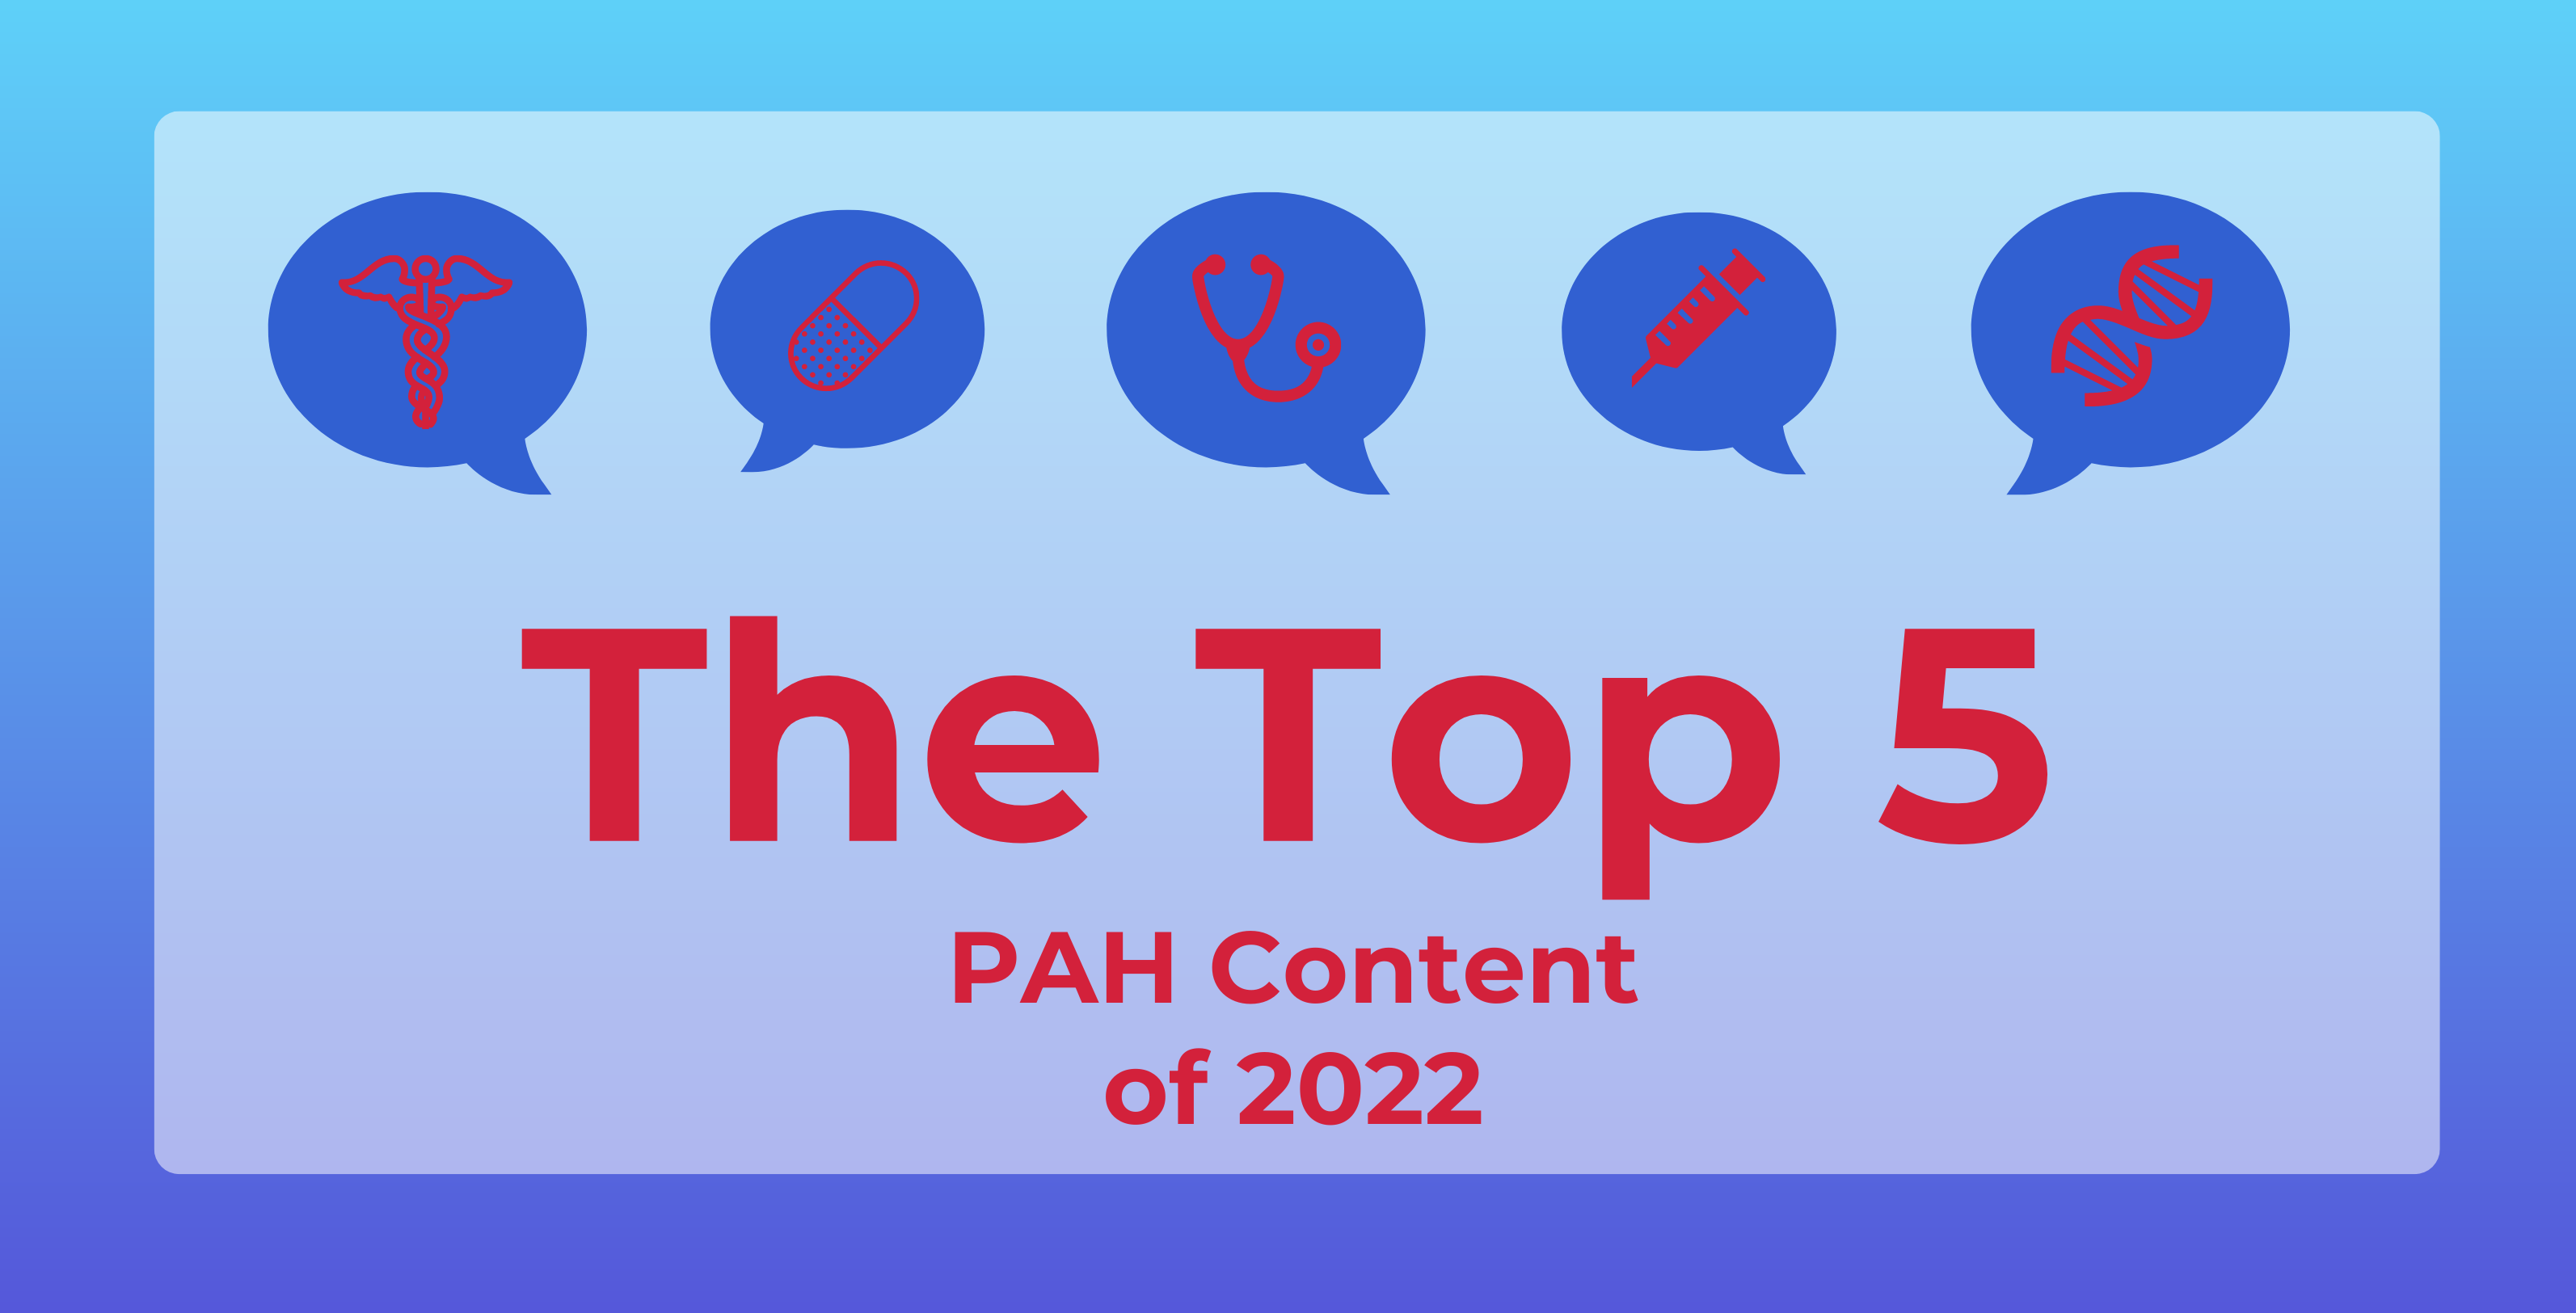 Top 5 Most-Read PAH Content of 2022